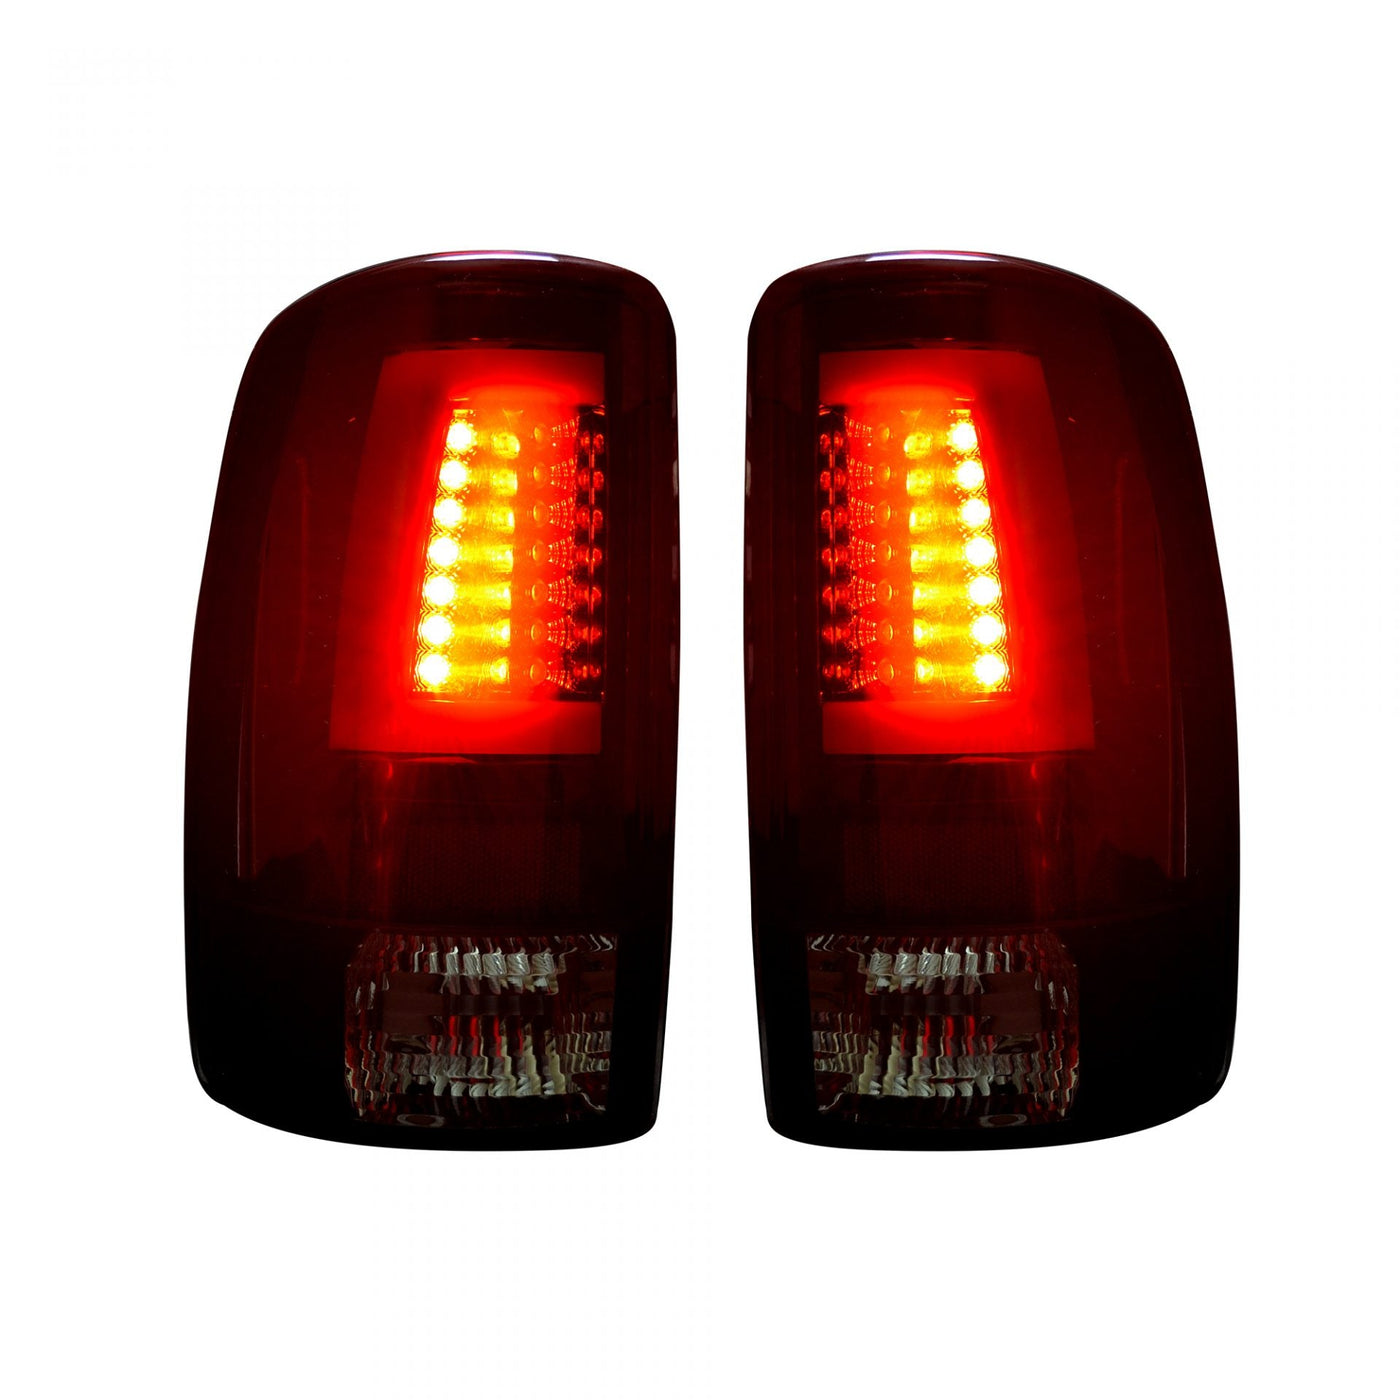 Chevy Tahoe Tail Lights, Chevy Suburban Tail Lights, GMC Yukon Tail Lights, GMC Denali Tail Lights, Tail Lights, Dark Red Smoked Tail Lights, Recon Tail Lights